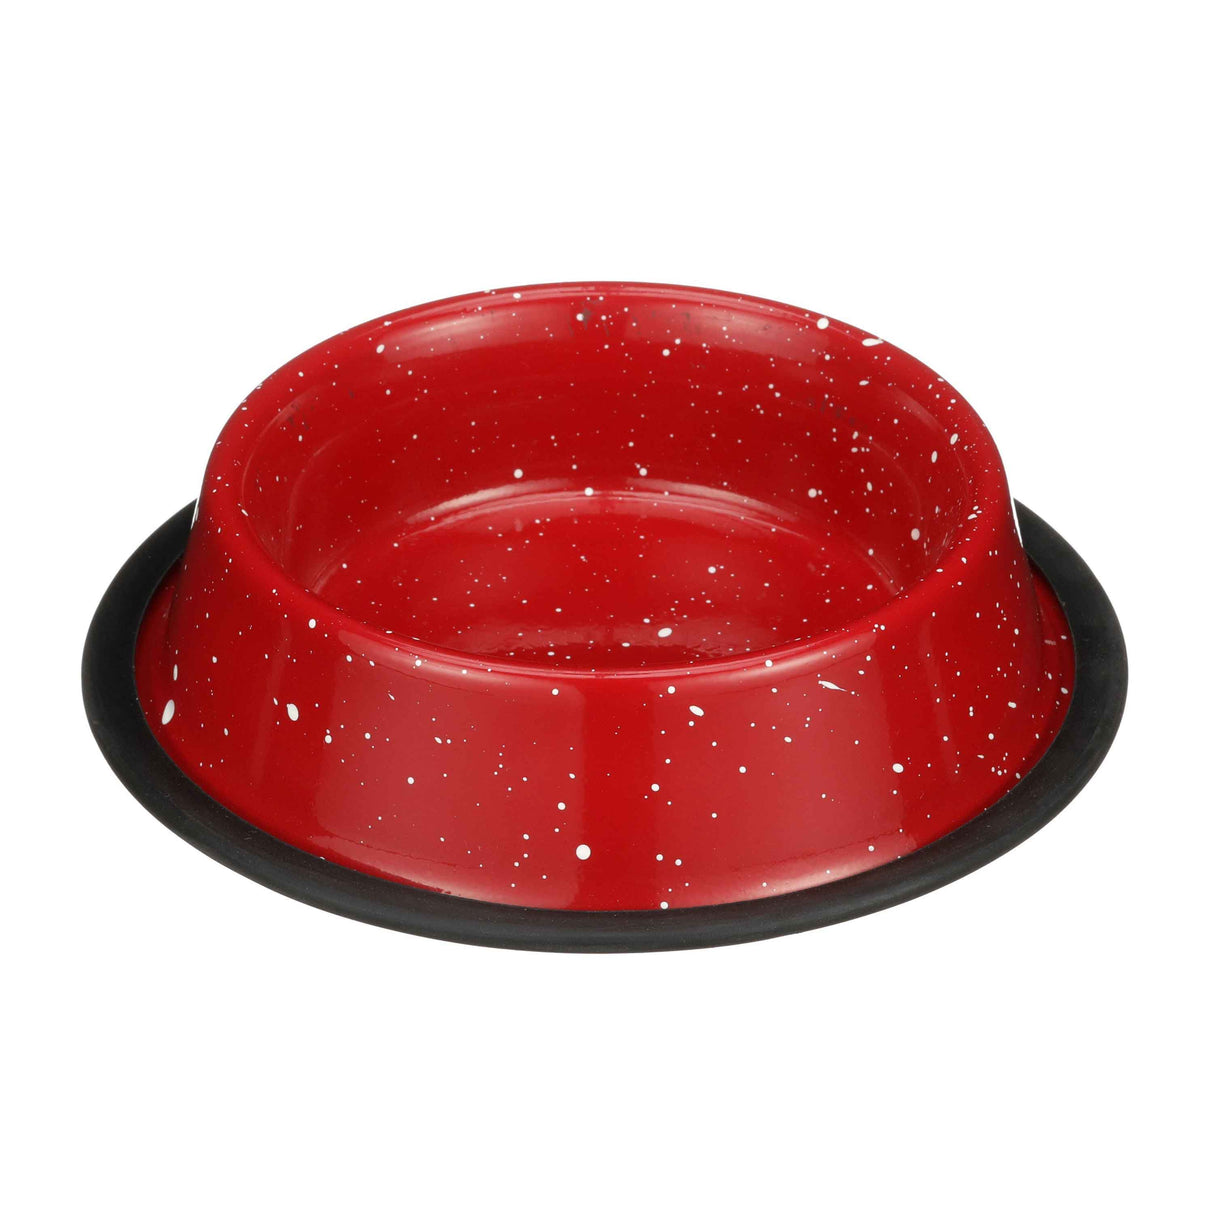 Red Camping Bowl with white specs 